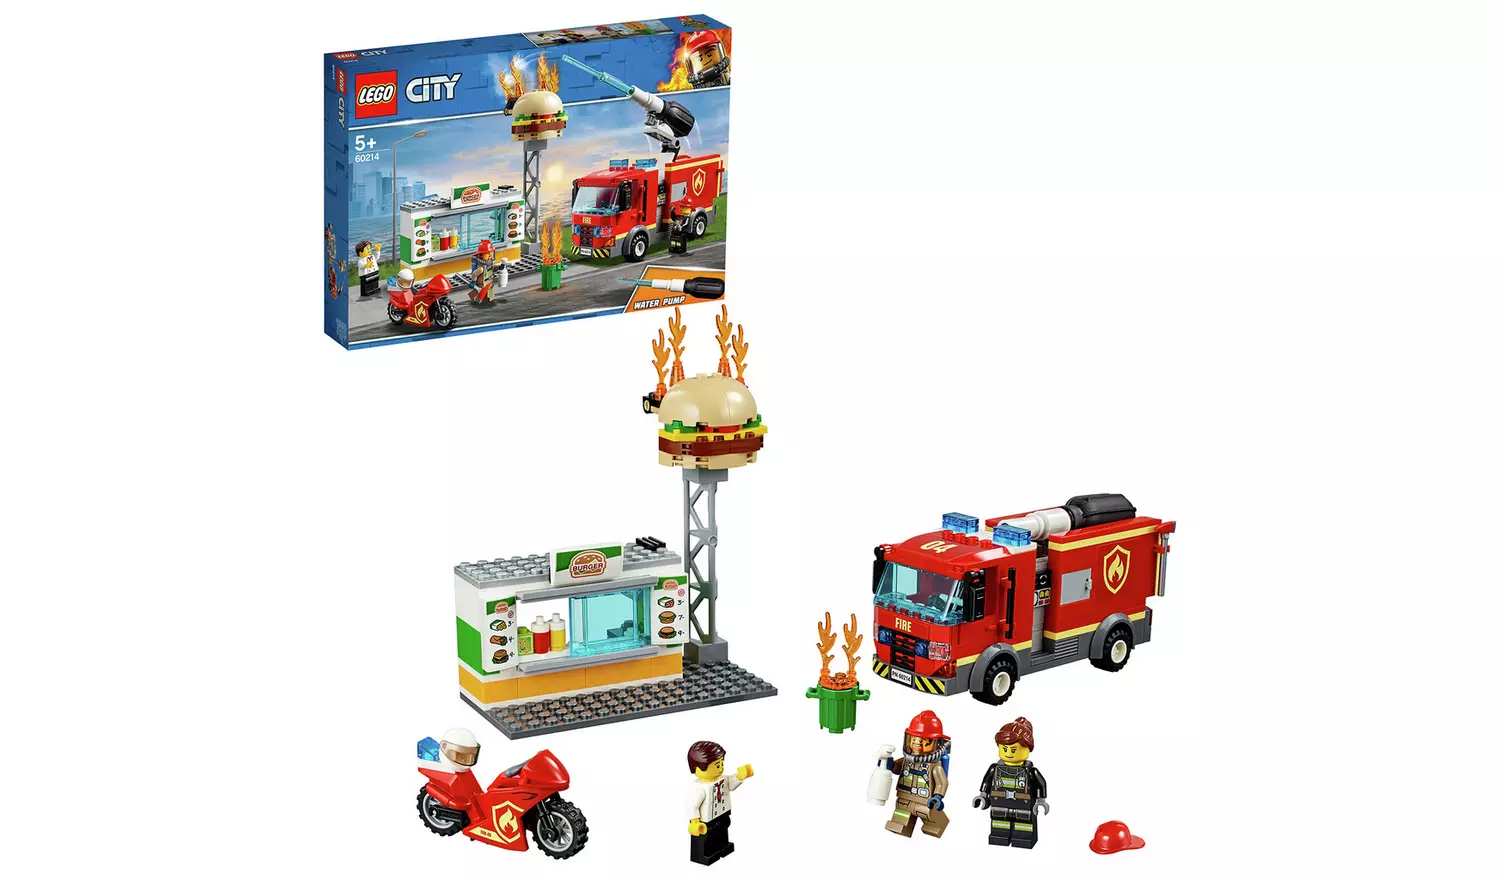 LEGO City Burger Bar Fire Rescue Toy Truck Playset- 60214883/6726